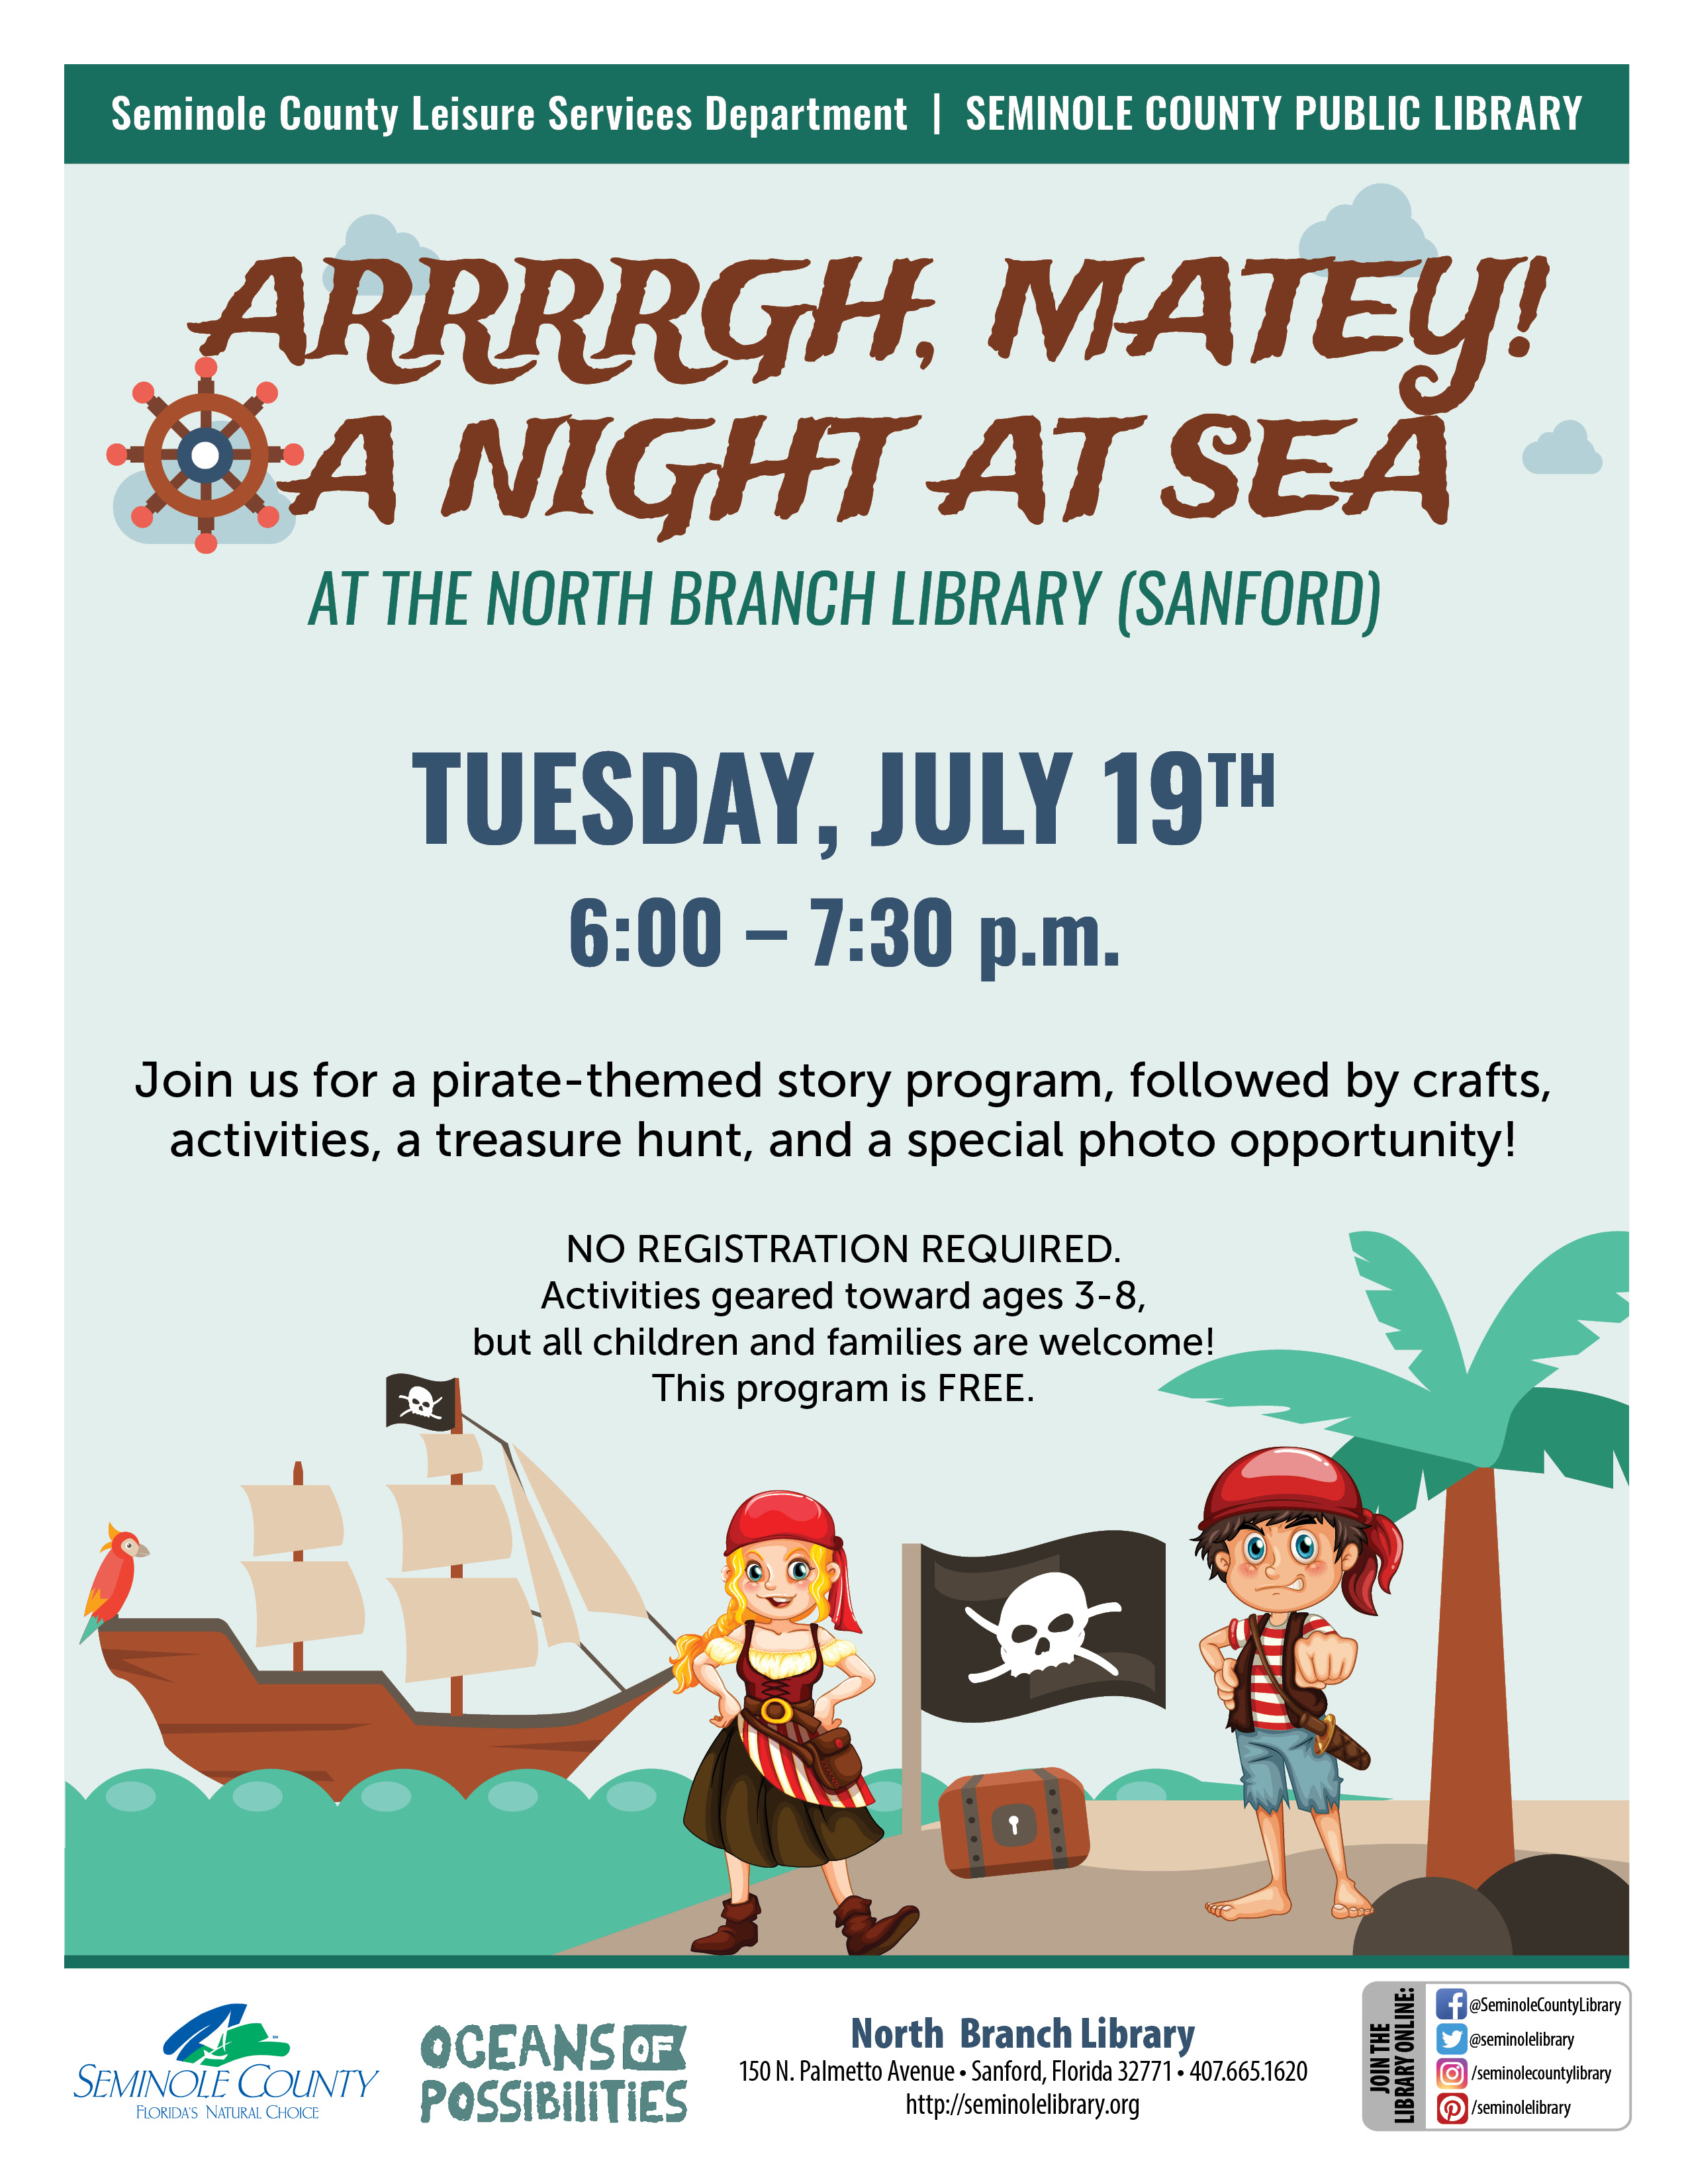 Arrrrgh, Matey, a Night at Sea - North Branch Library